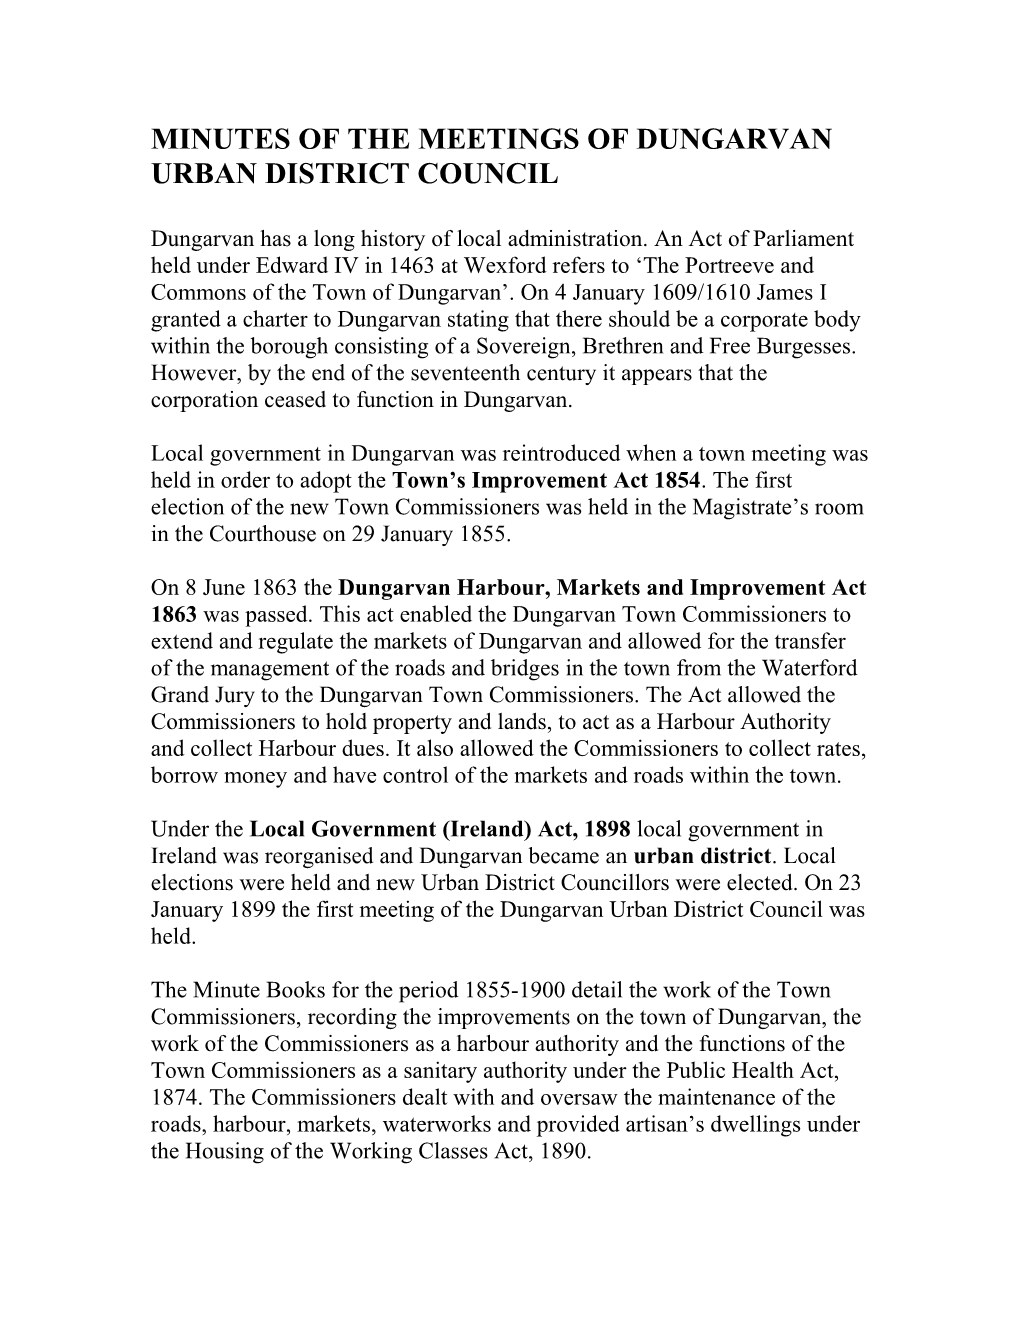 Minutes of the Meetings of Dungarvan Urban District Council